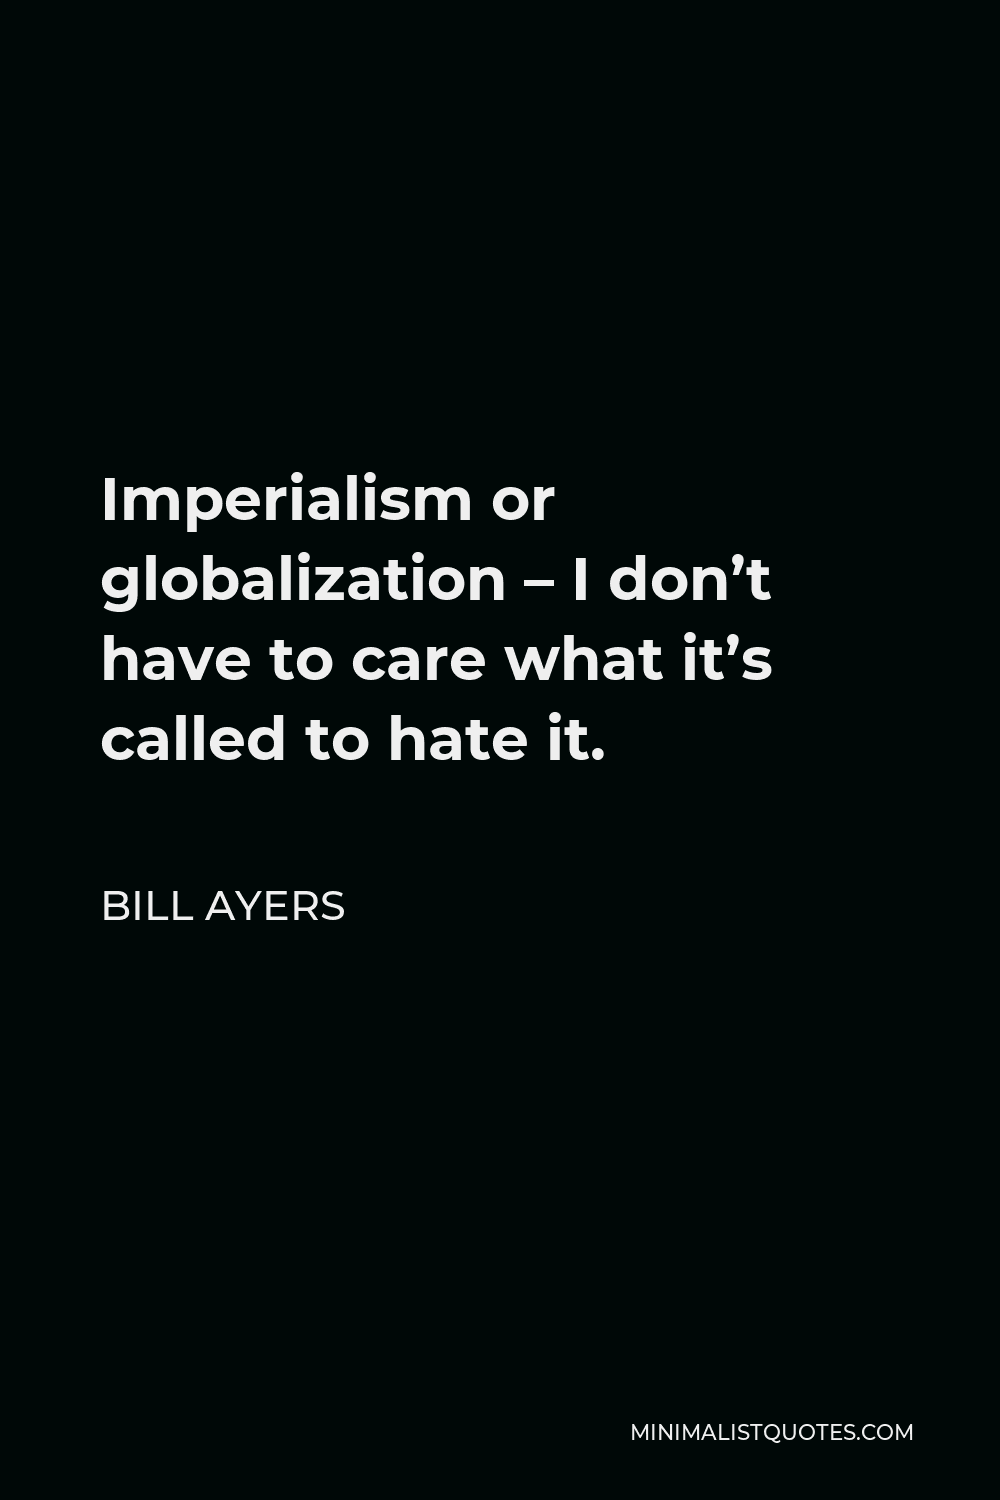 Bill Ayers Quote - Imperialism or globalization – I don’t have to care what it’s called to hate it.